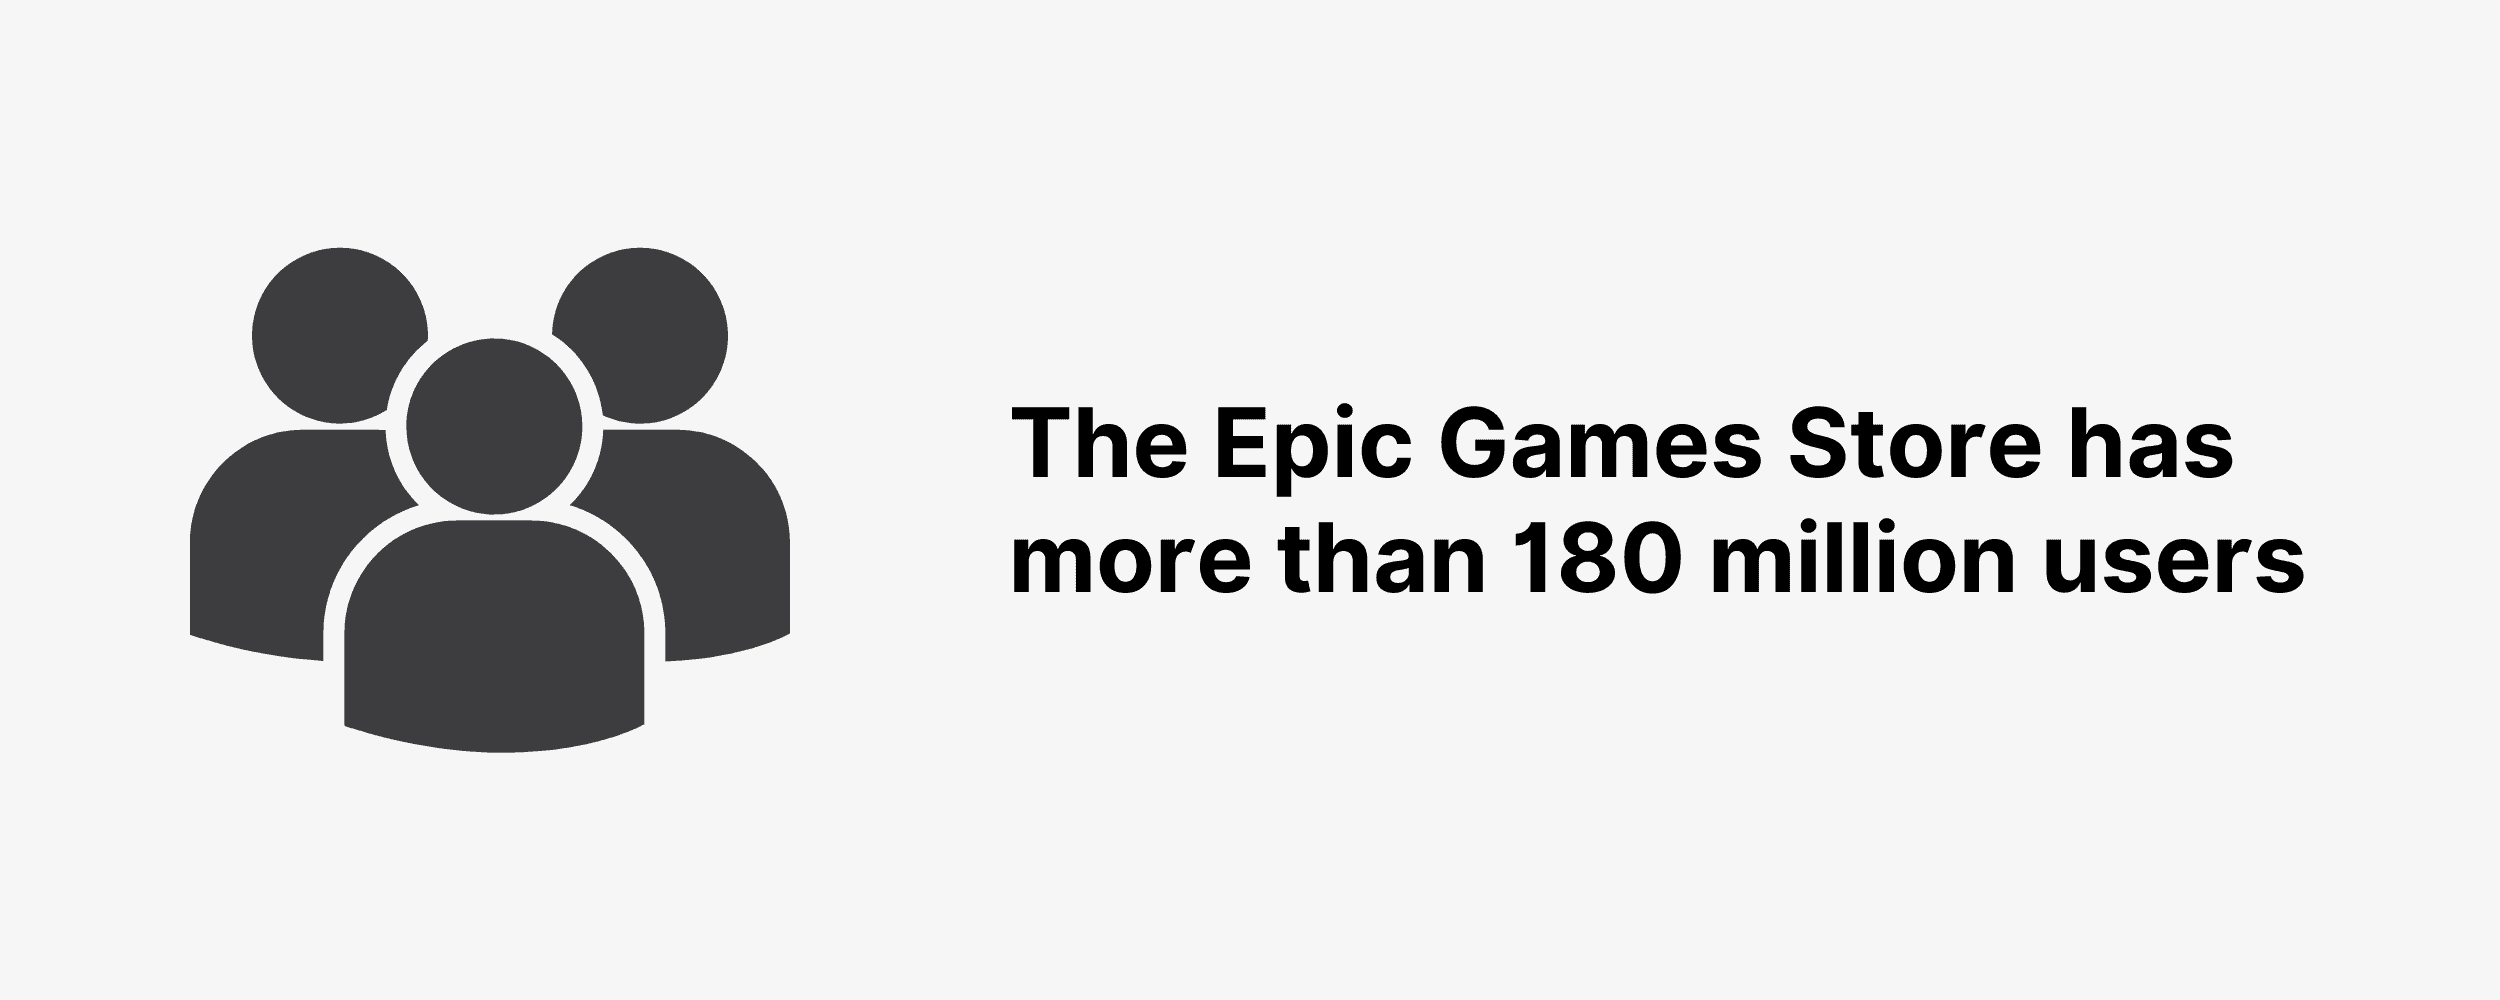 The Epic Games Store has more than 180 million users